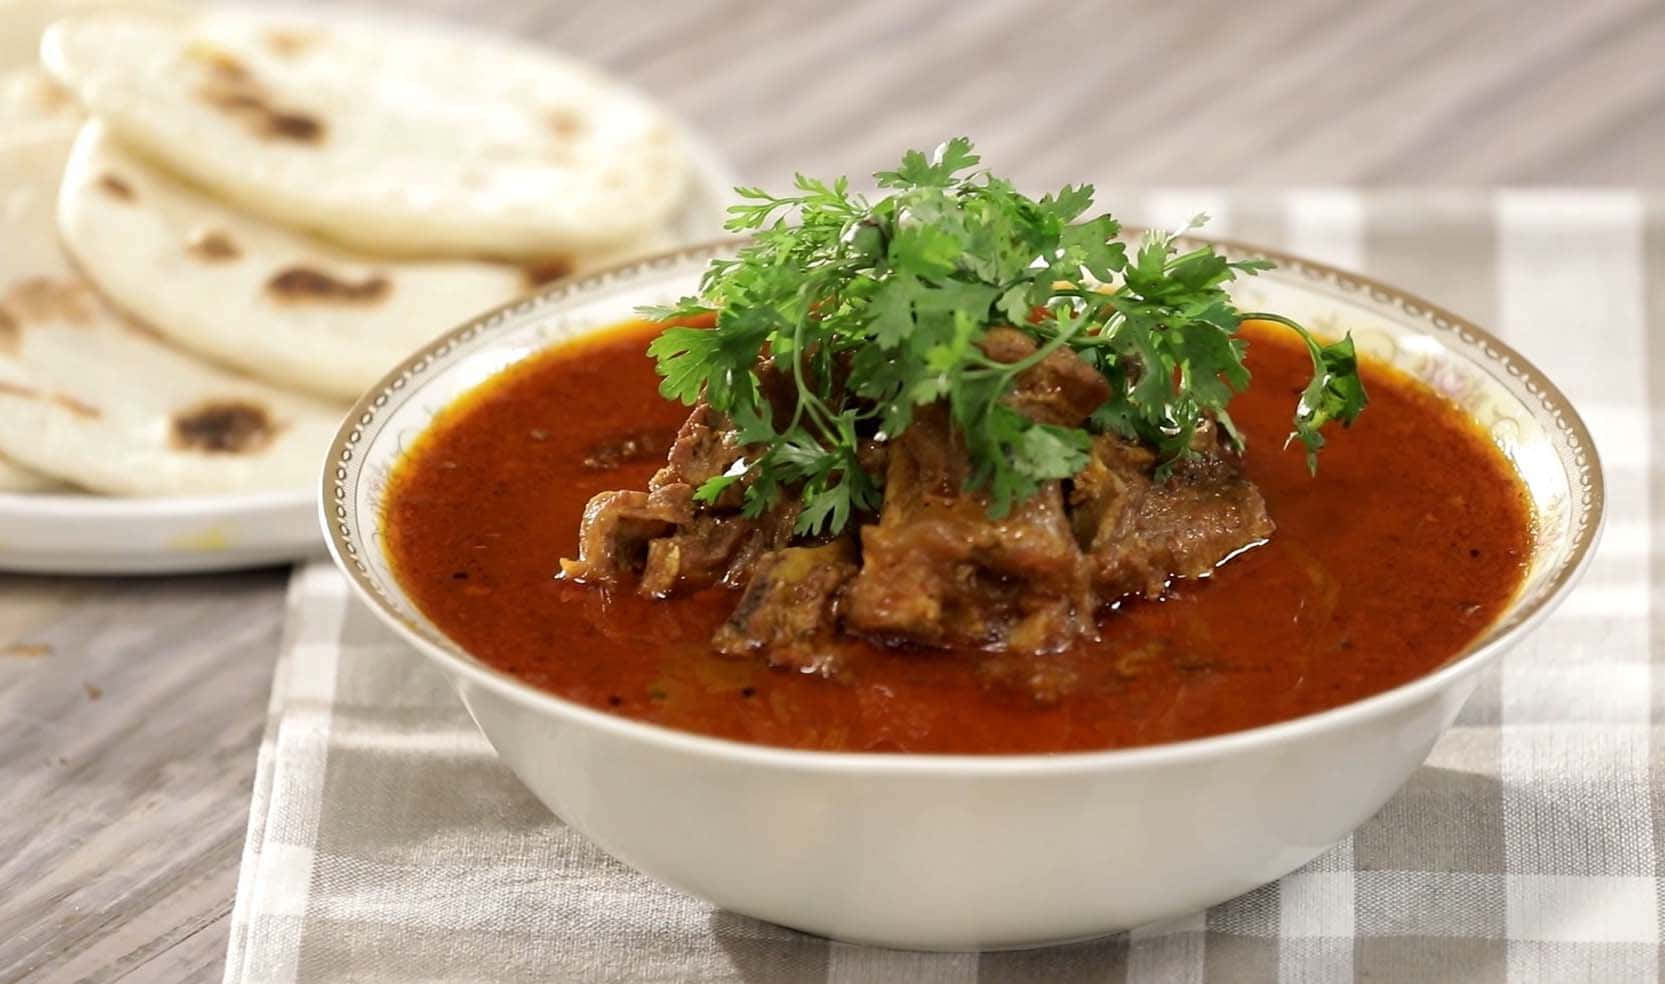 Mutton Curry Background Images HD Pictures and Wallpaper For Free Download   Pngtree